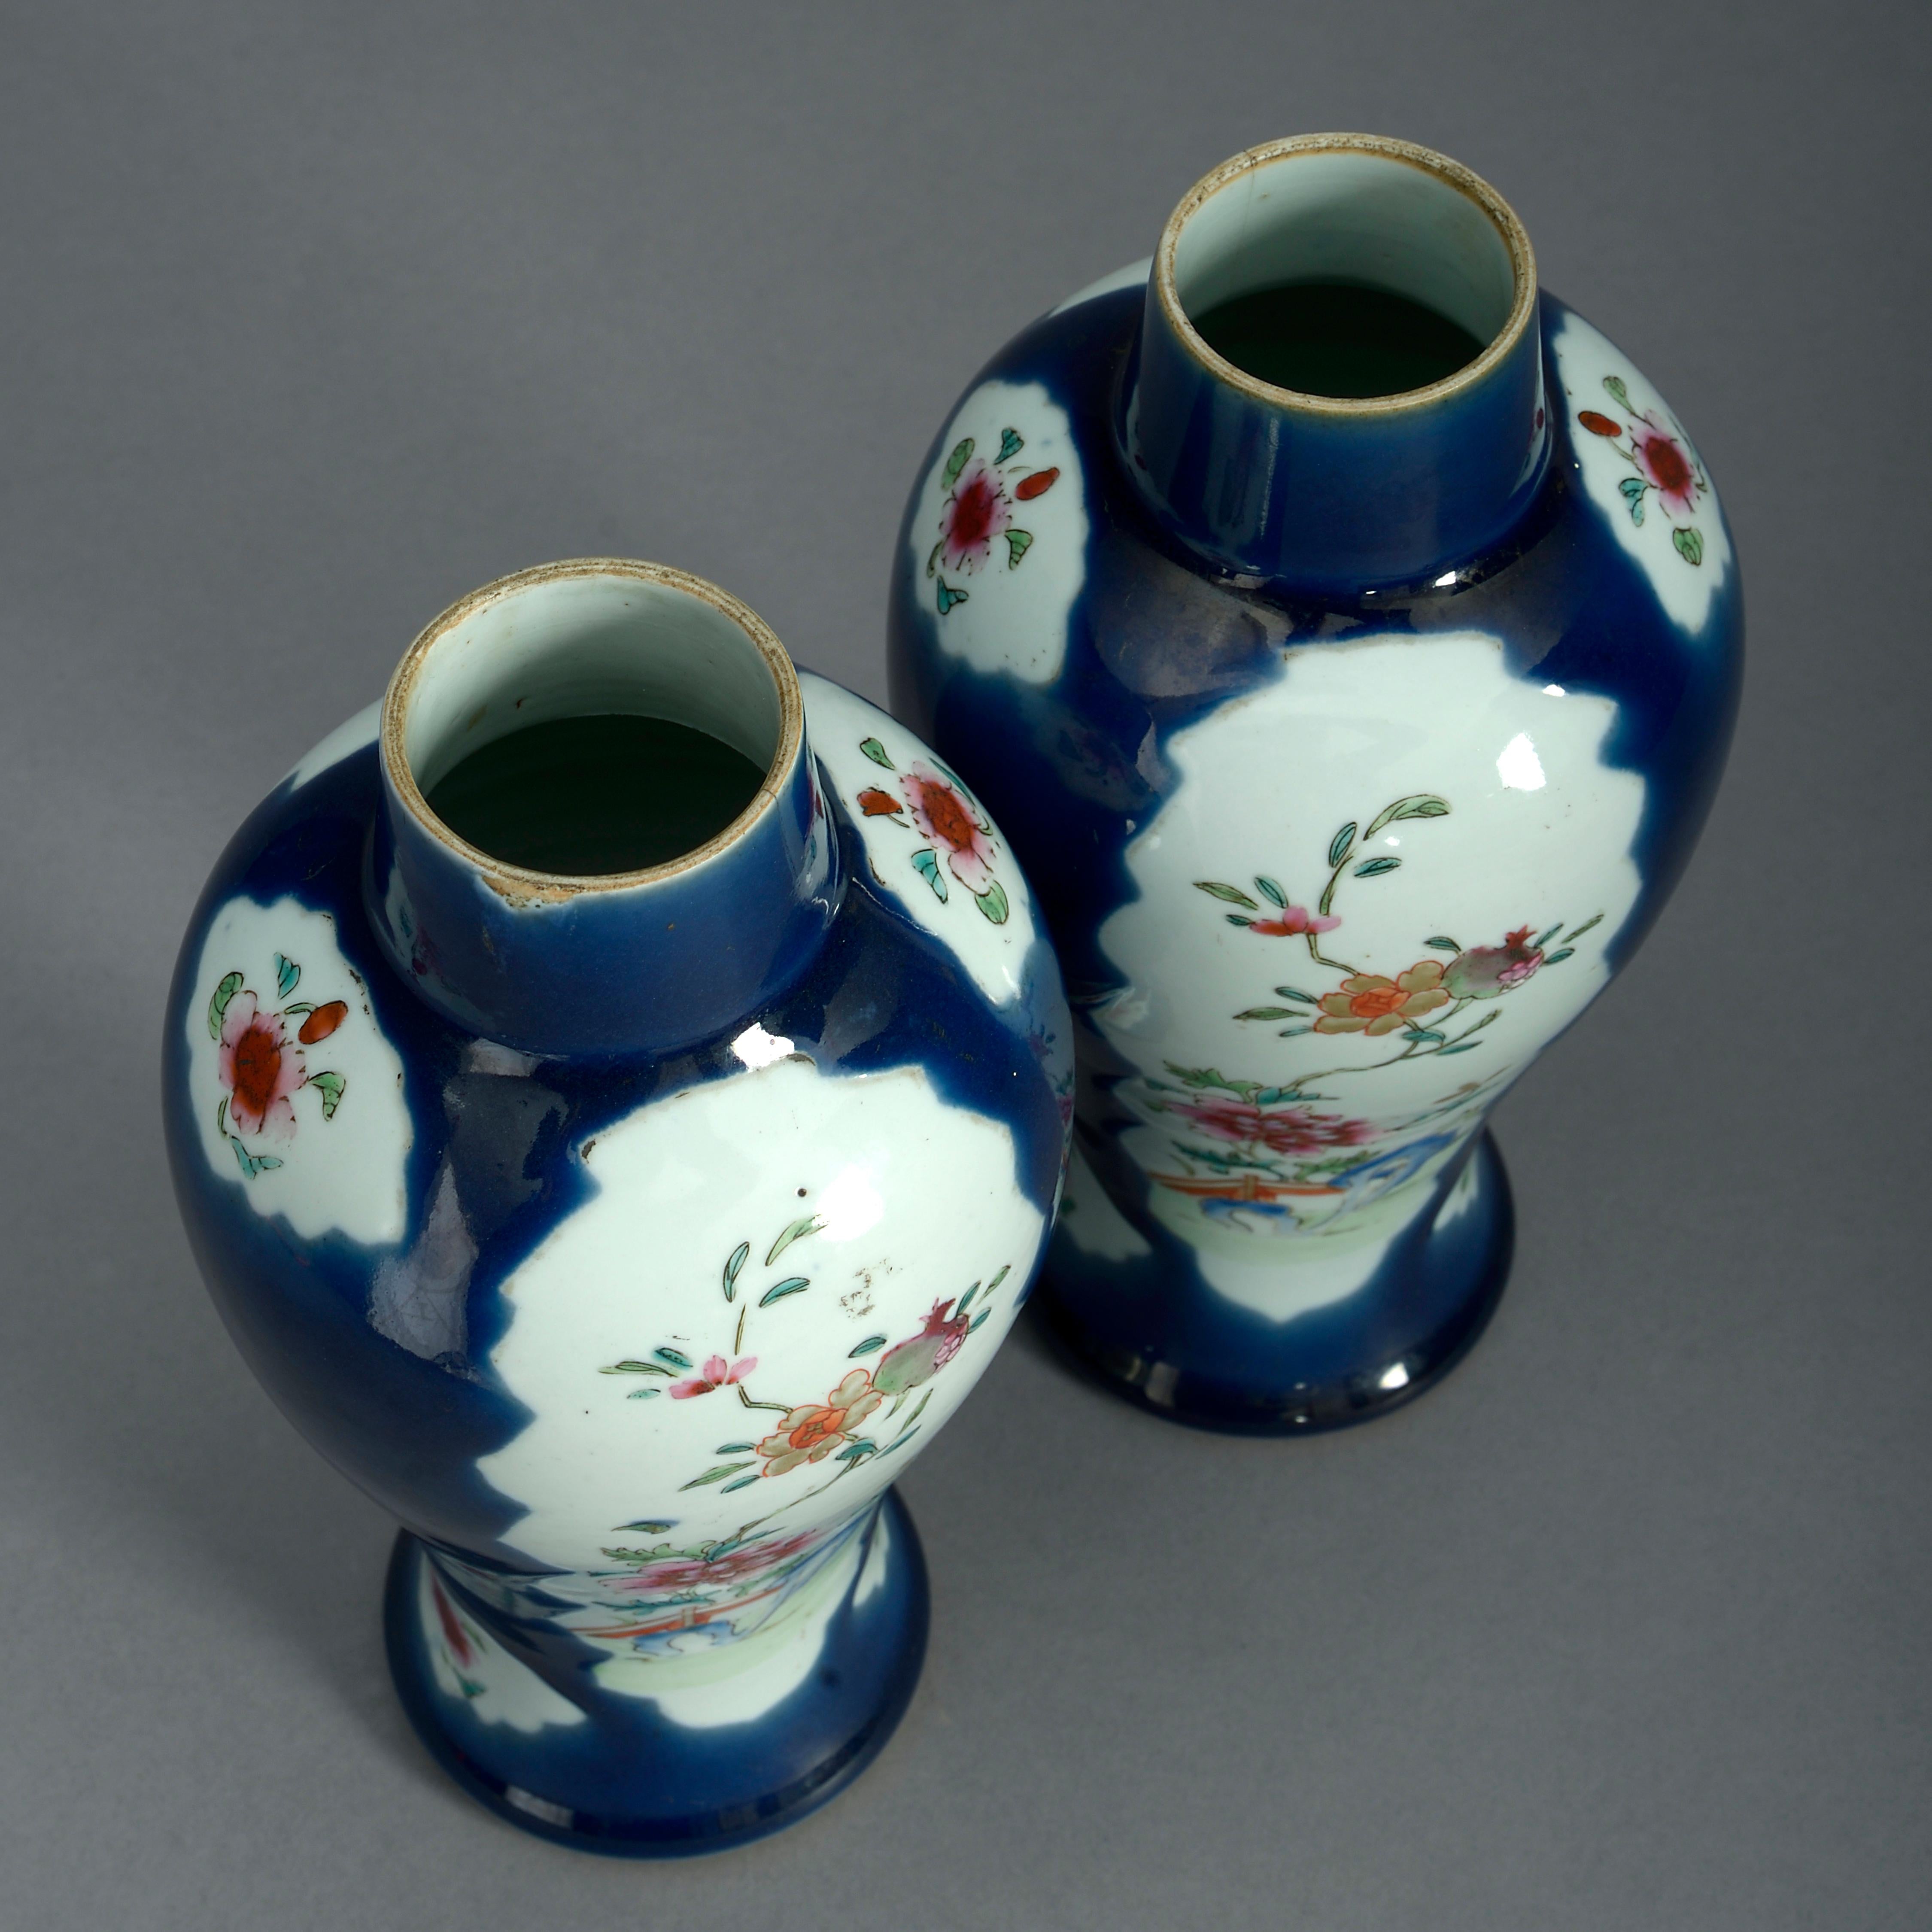 Chinese Pair of 18th Century Famille Rose Porcelain Vases